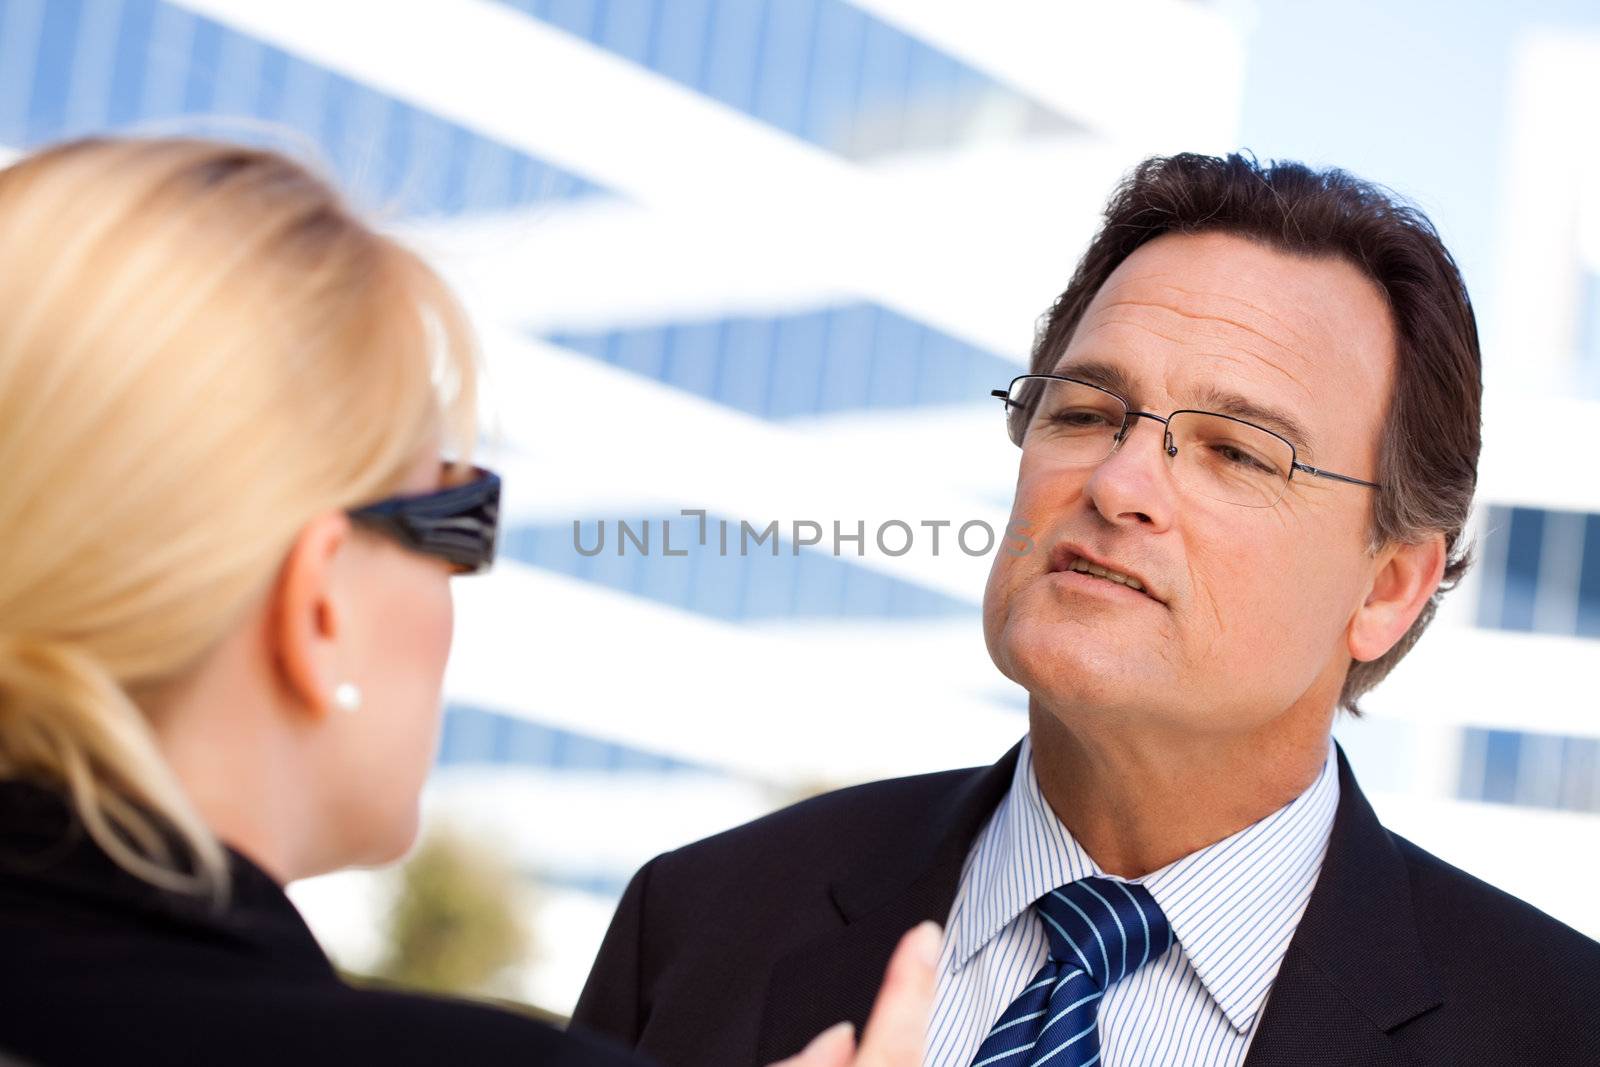 Attentive, Handsome Businessman in Suit and Tie Talking with Female Colleague Outdoors.